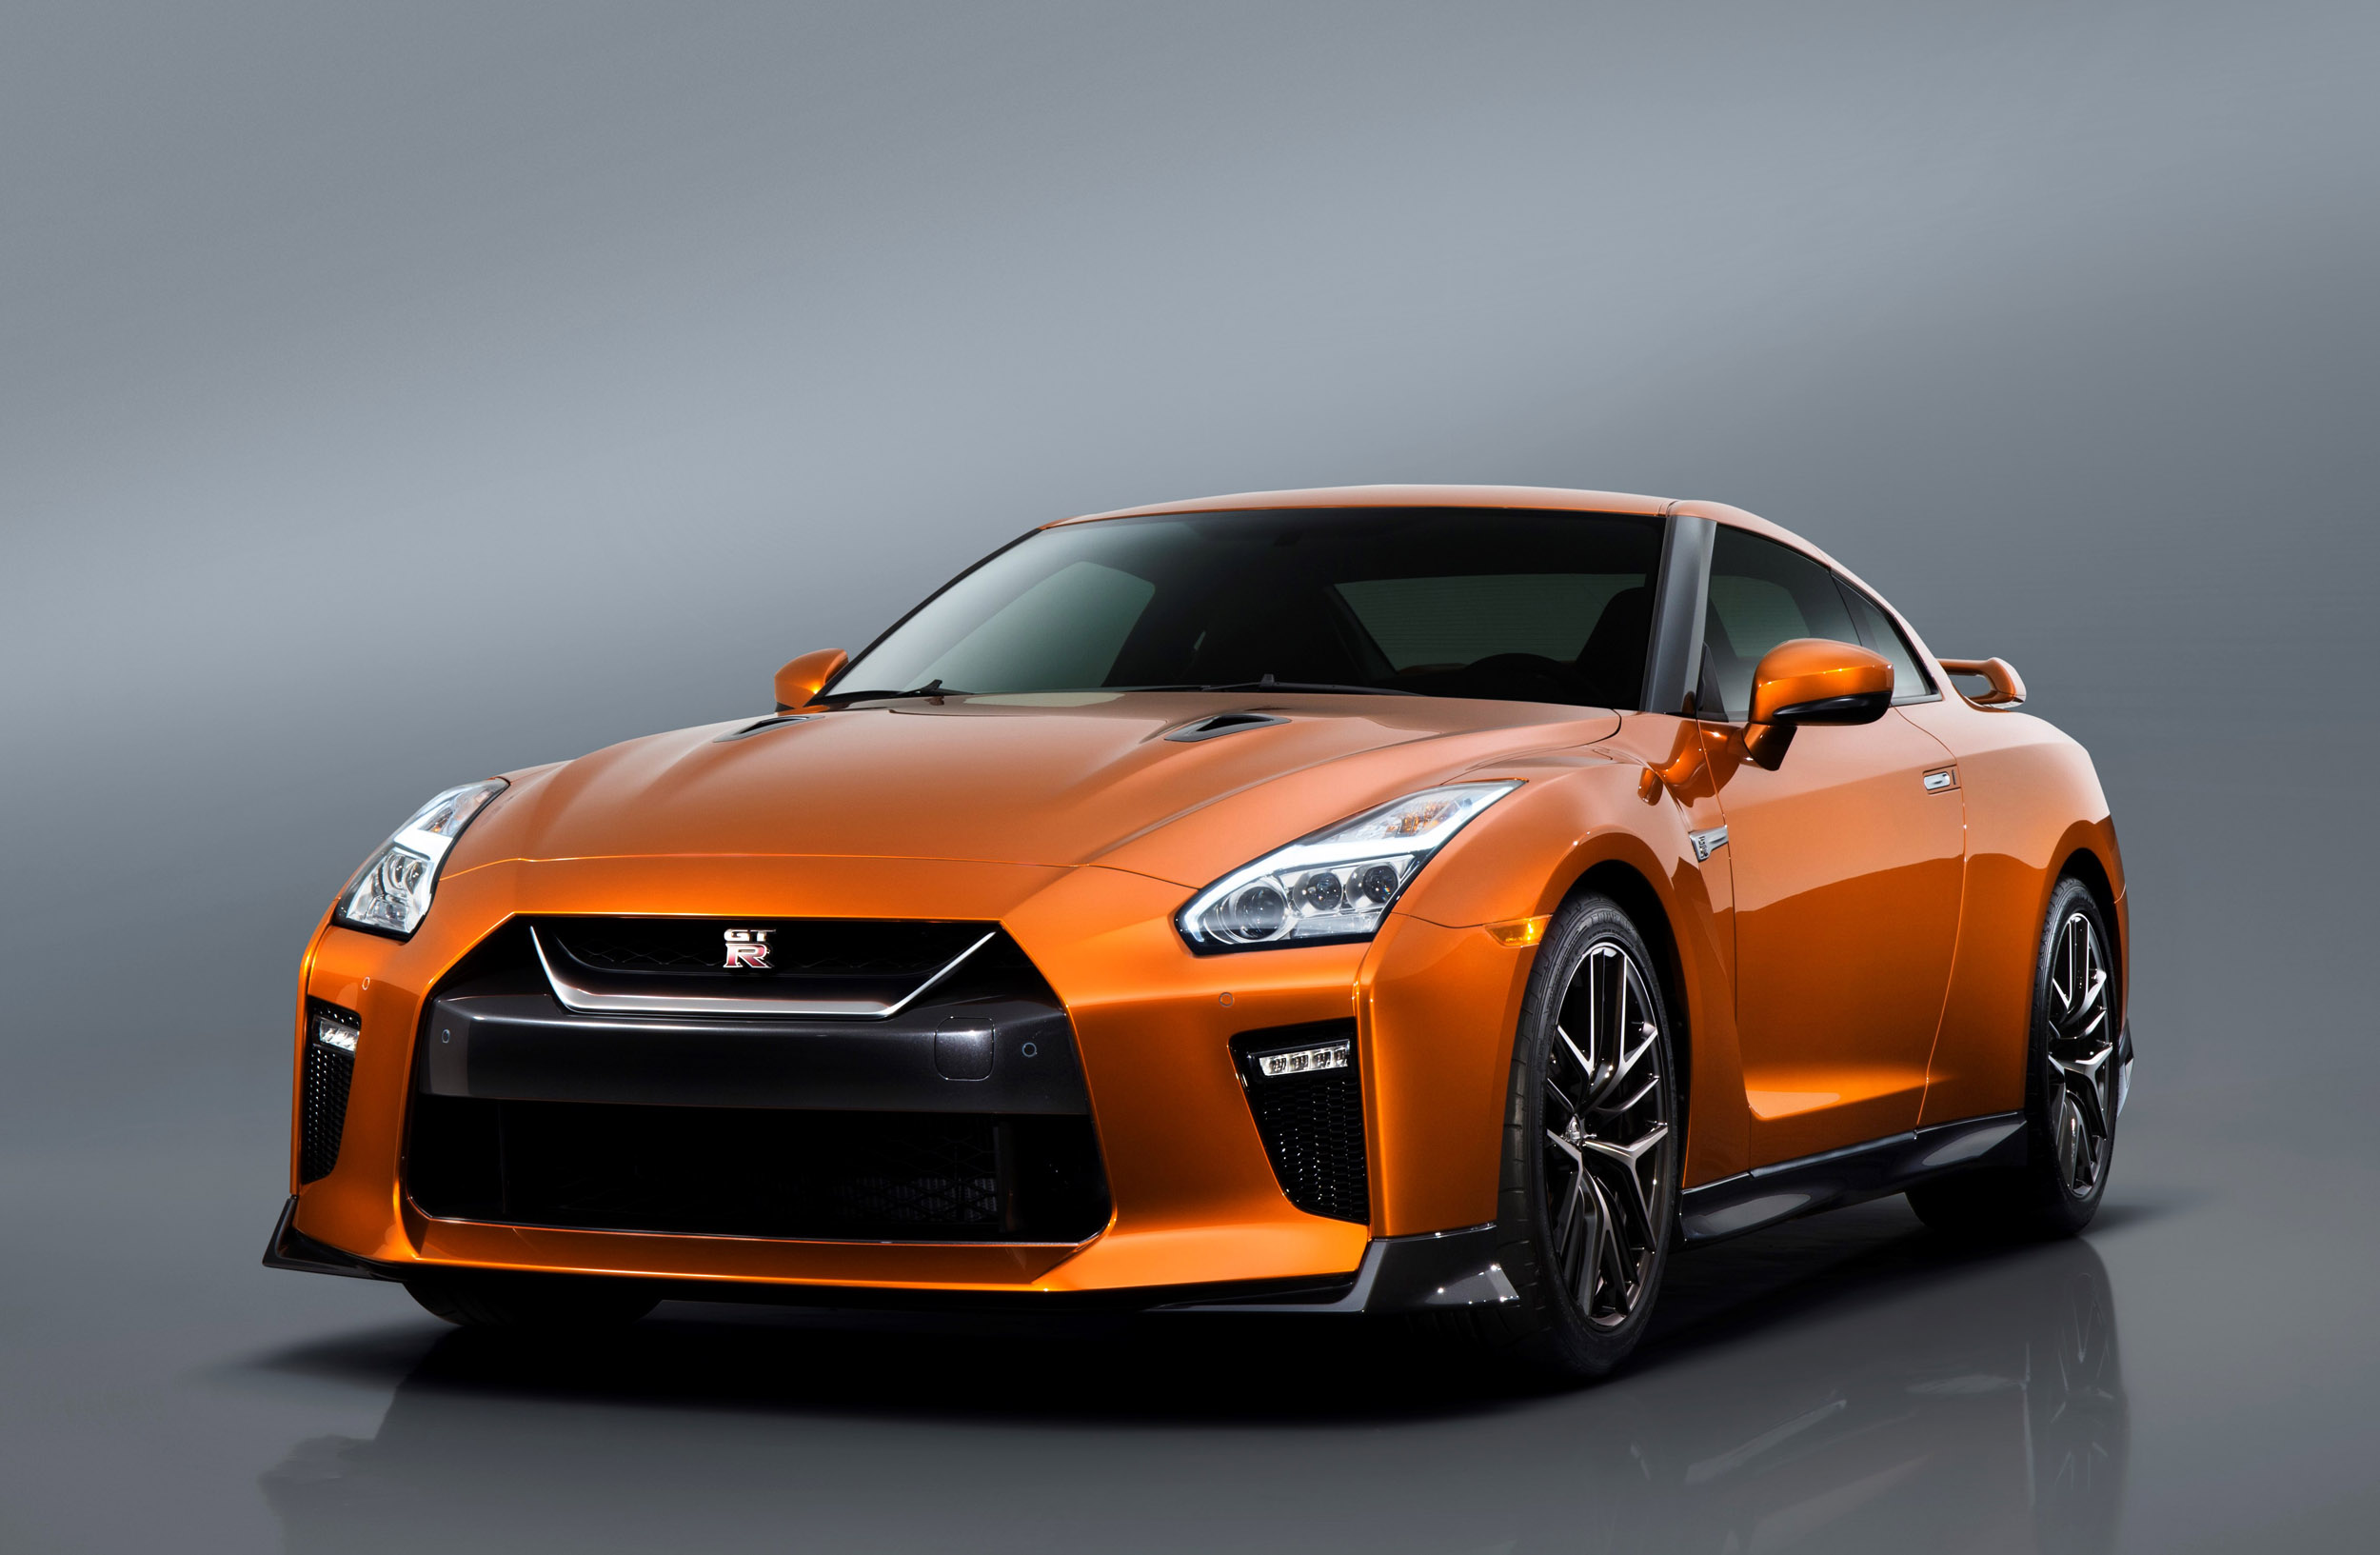 Nissan GT-R review prices, specs and 0-60 time | evo